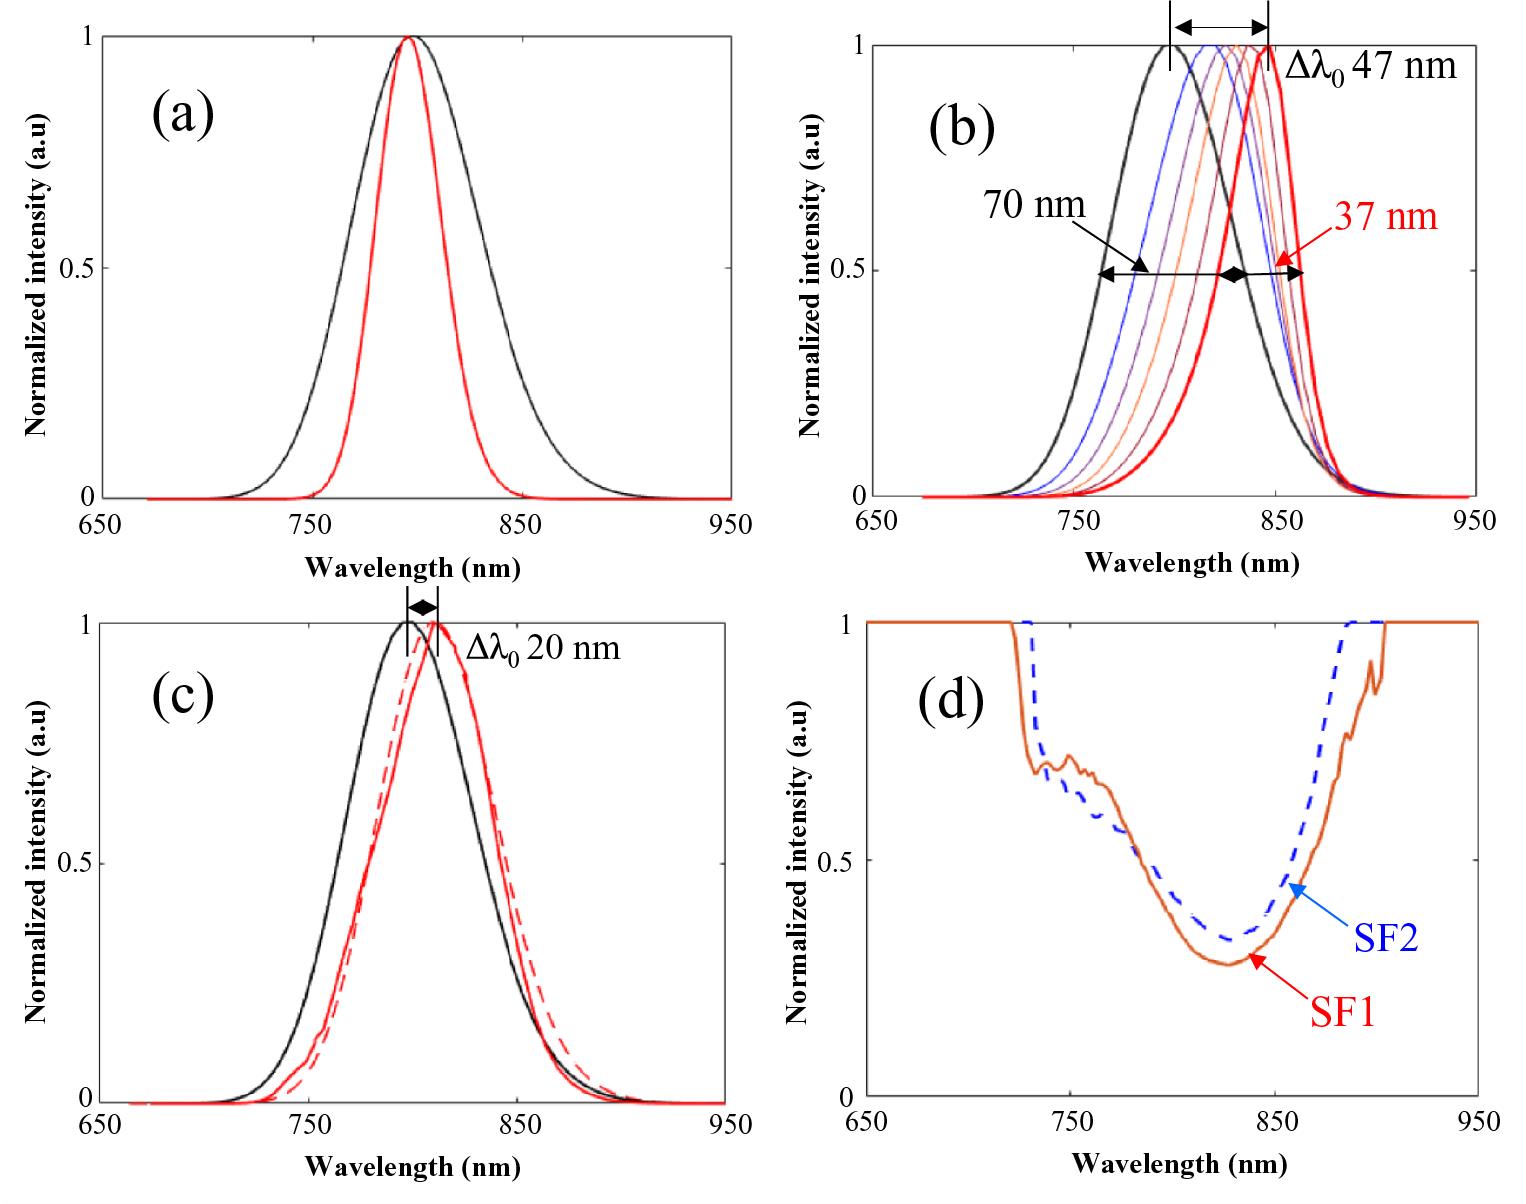 Normalized input Gaussian spectrum (black line) and amplified spectrum (red line) with a total effective gain of 105: (a) without saturation effect; (b) under gain narrowing and gain saturation; (c) with gain narrowing and (d) with gain saturation compensation performed by two spectral filters, SF1 and SF2, set up in the chain.